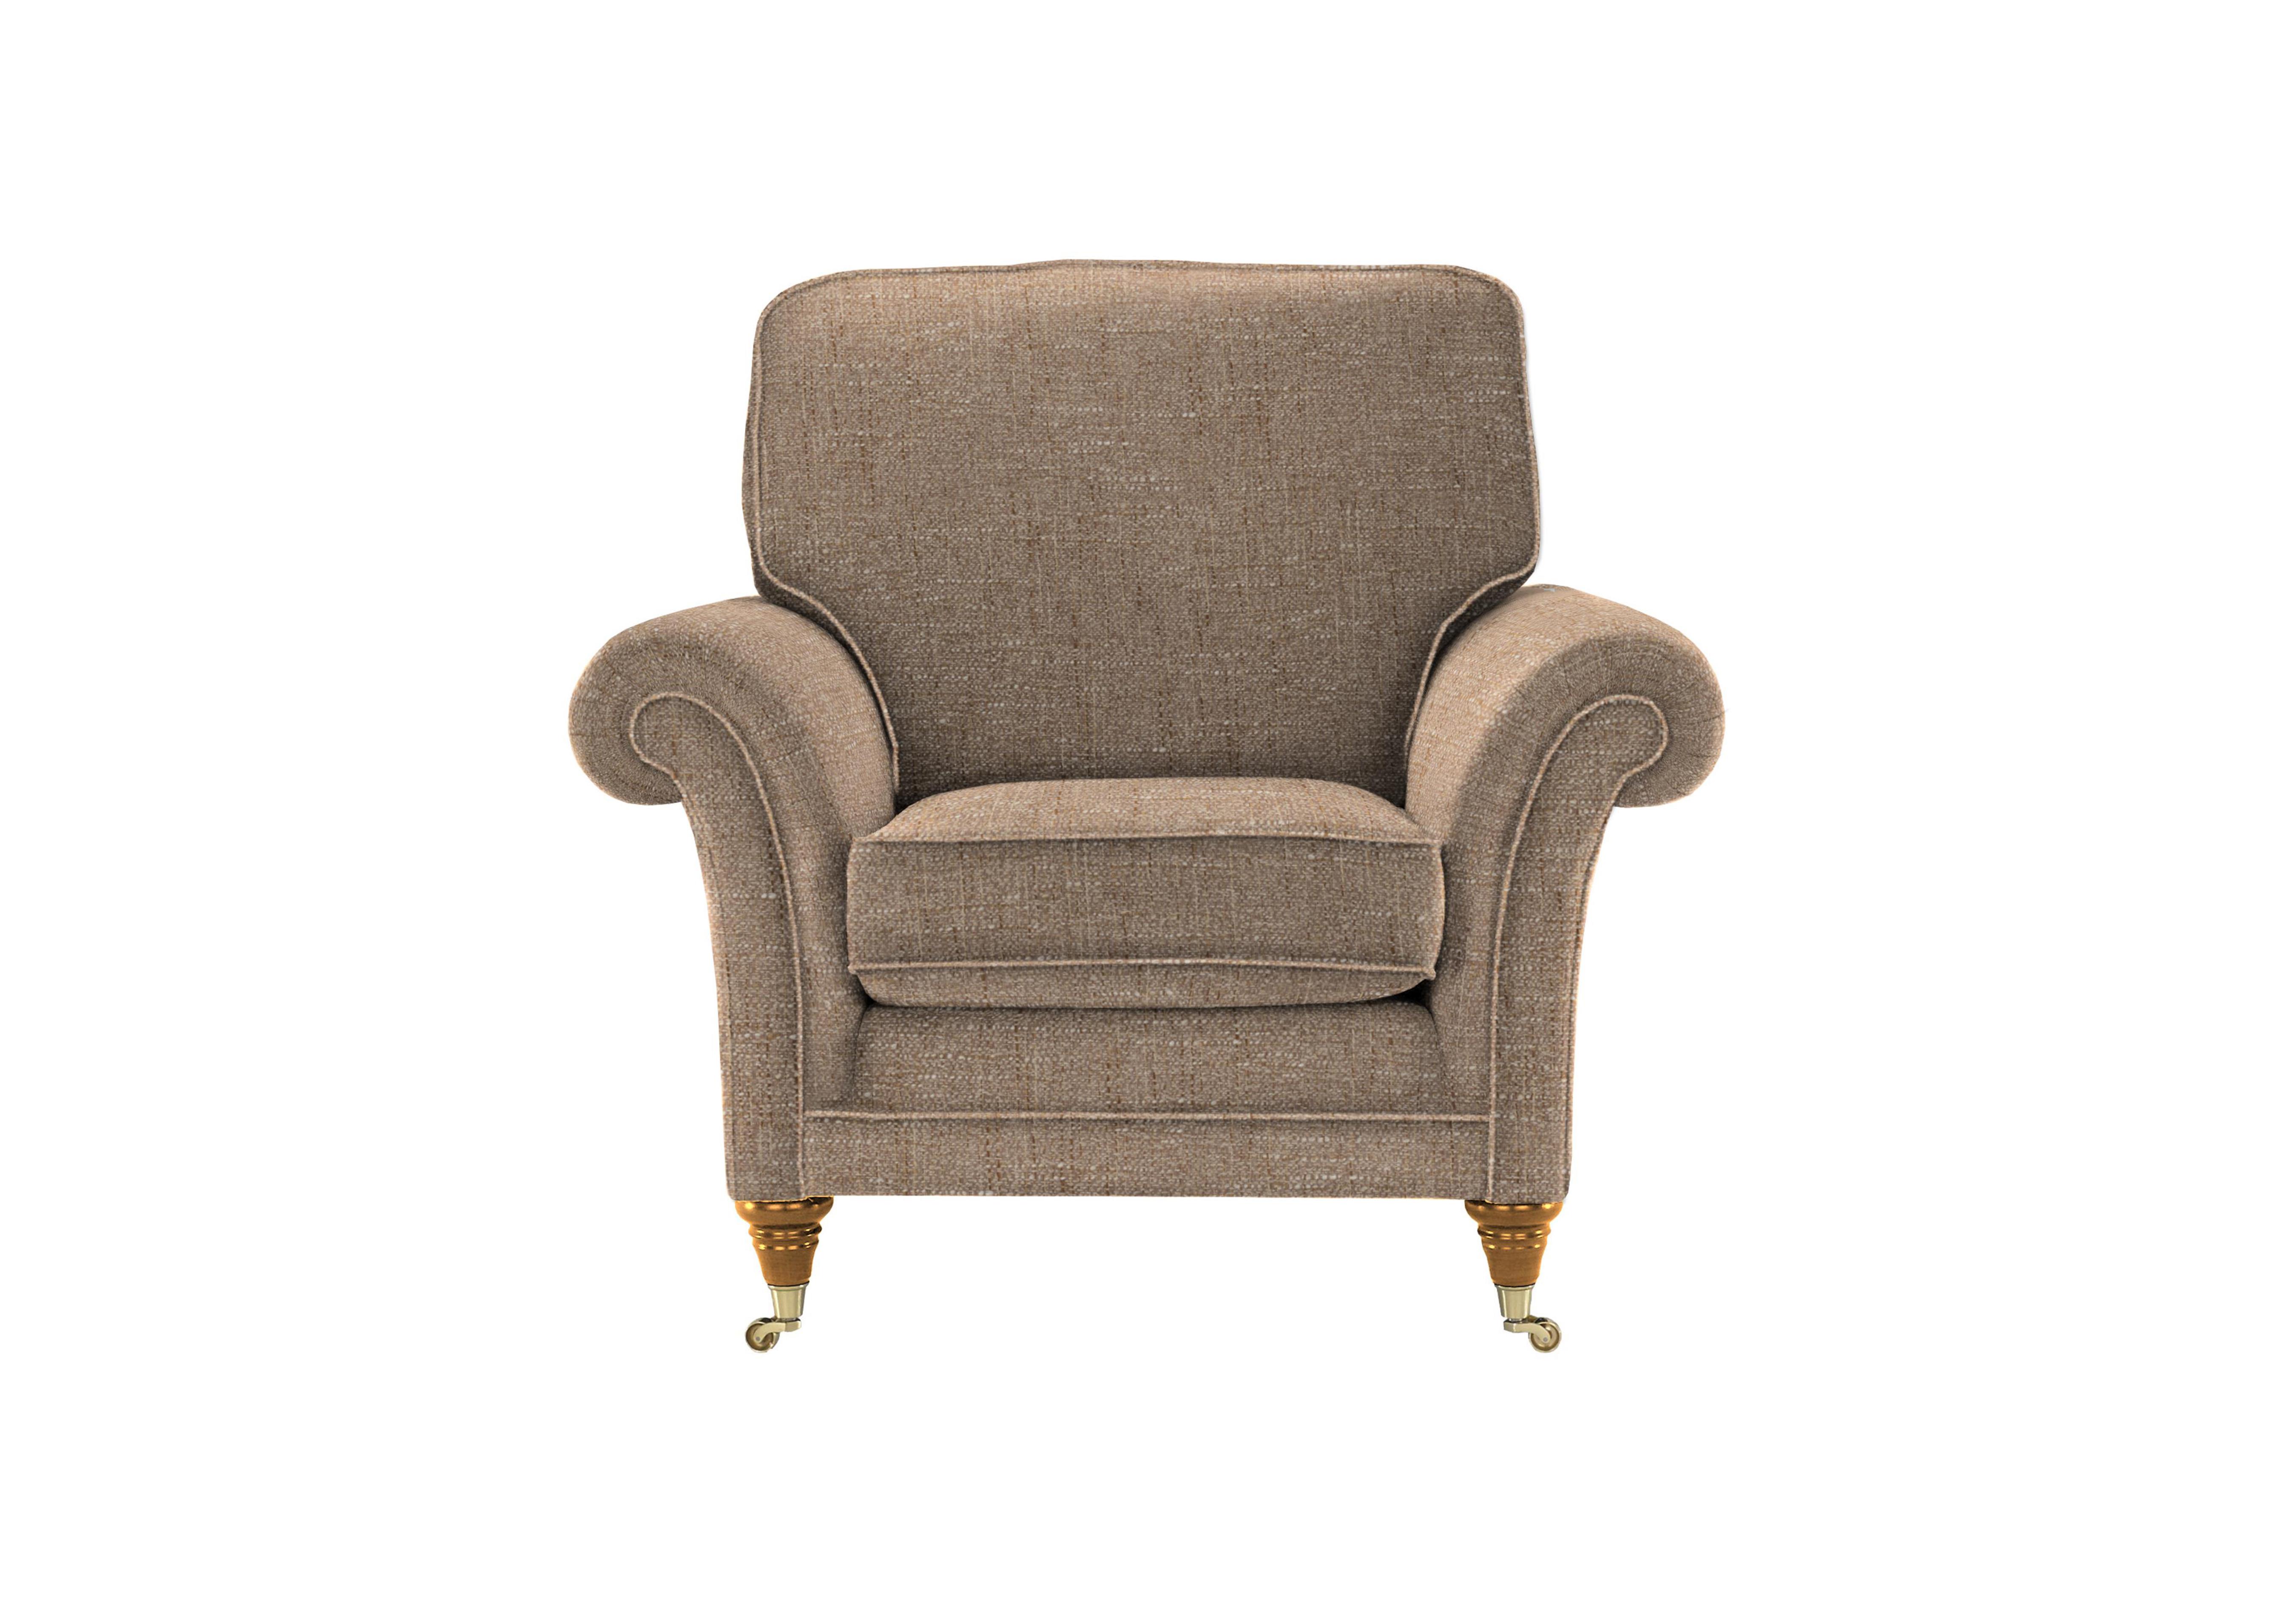 Burghley Fabric Armchair in 001408-0051 Country Oatmeal on Furniture Village